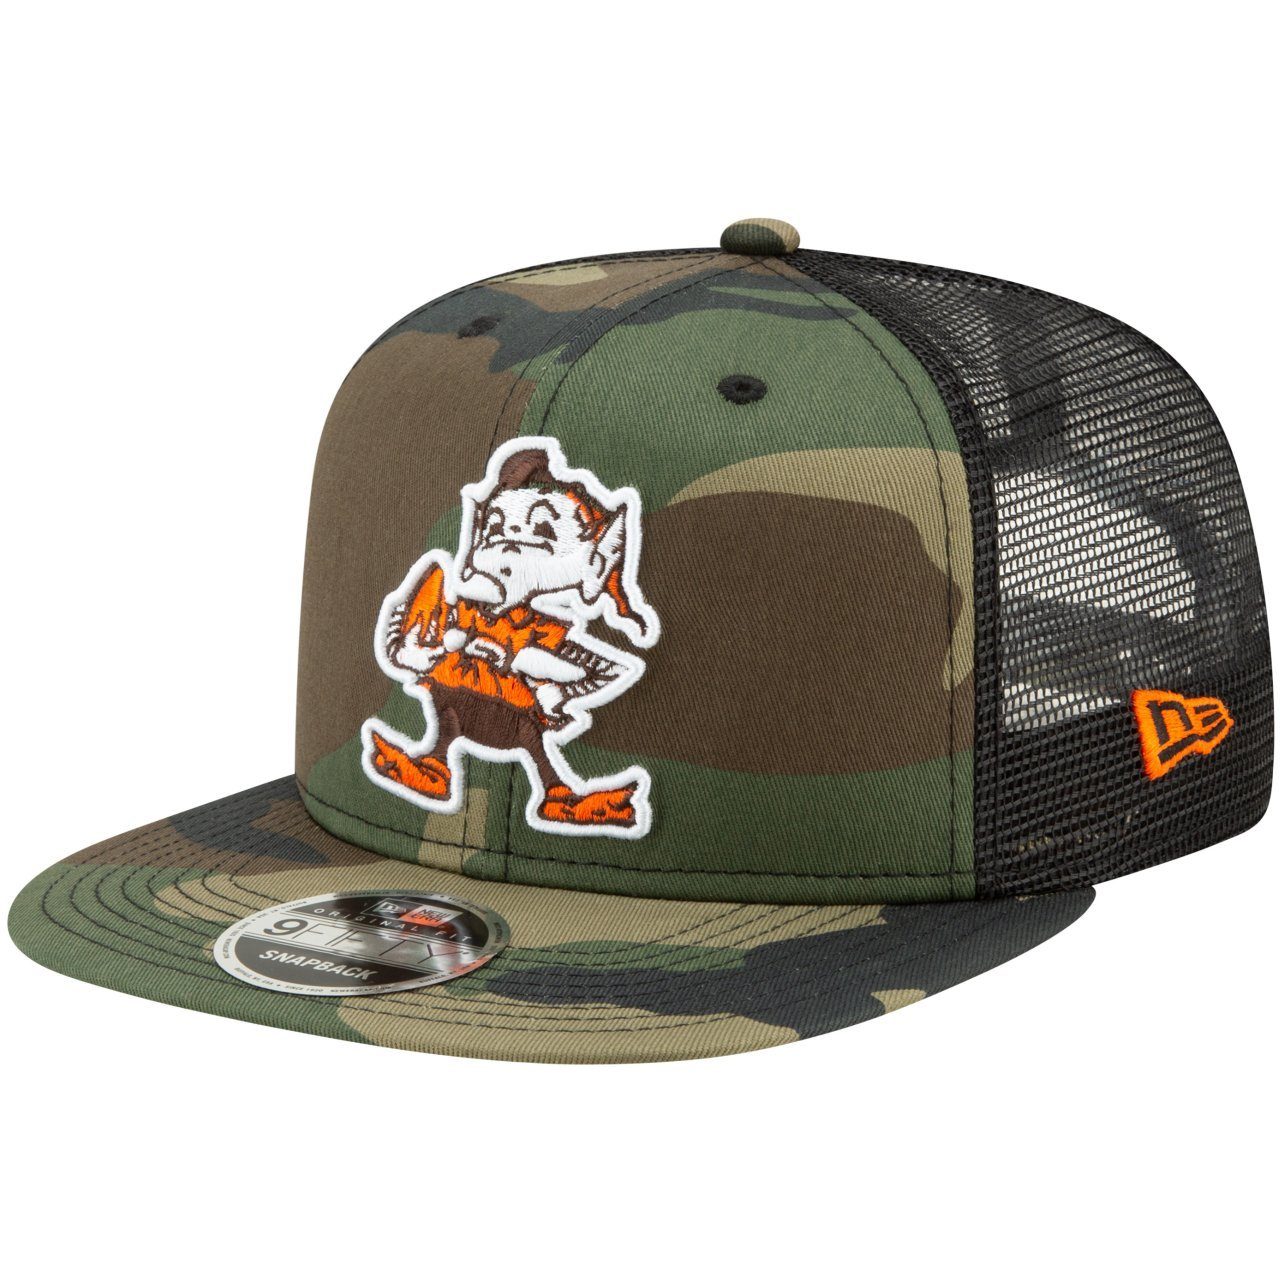 New Era Snapback Cap Throwback Cleveland Browns 9Fifty